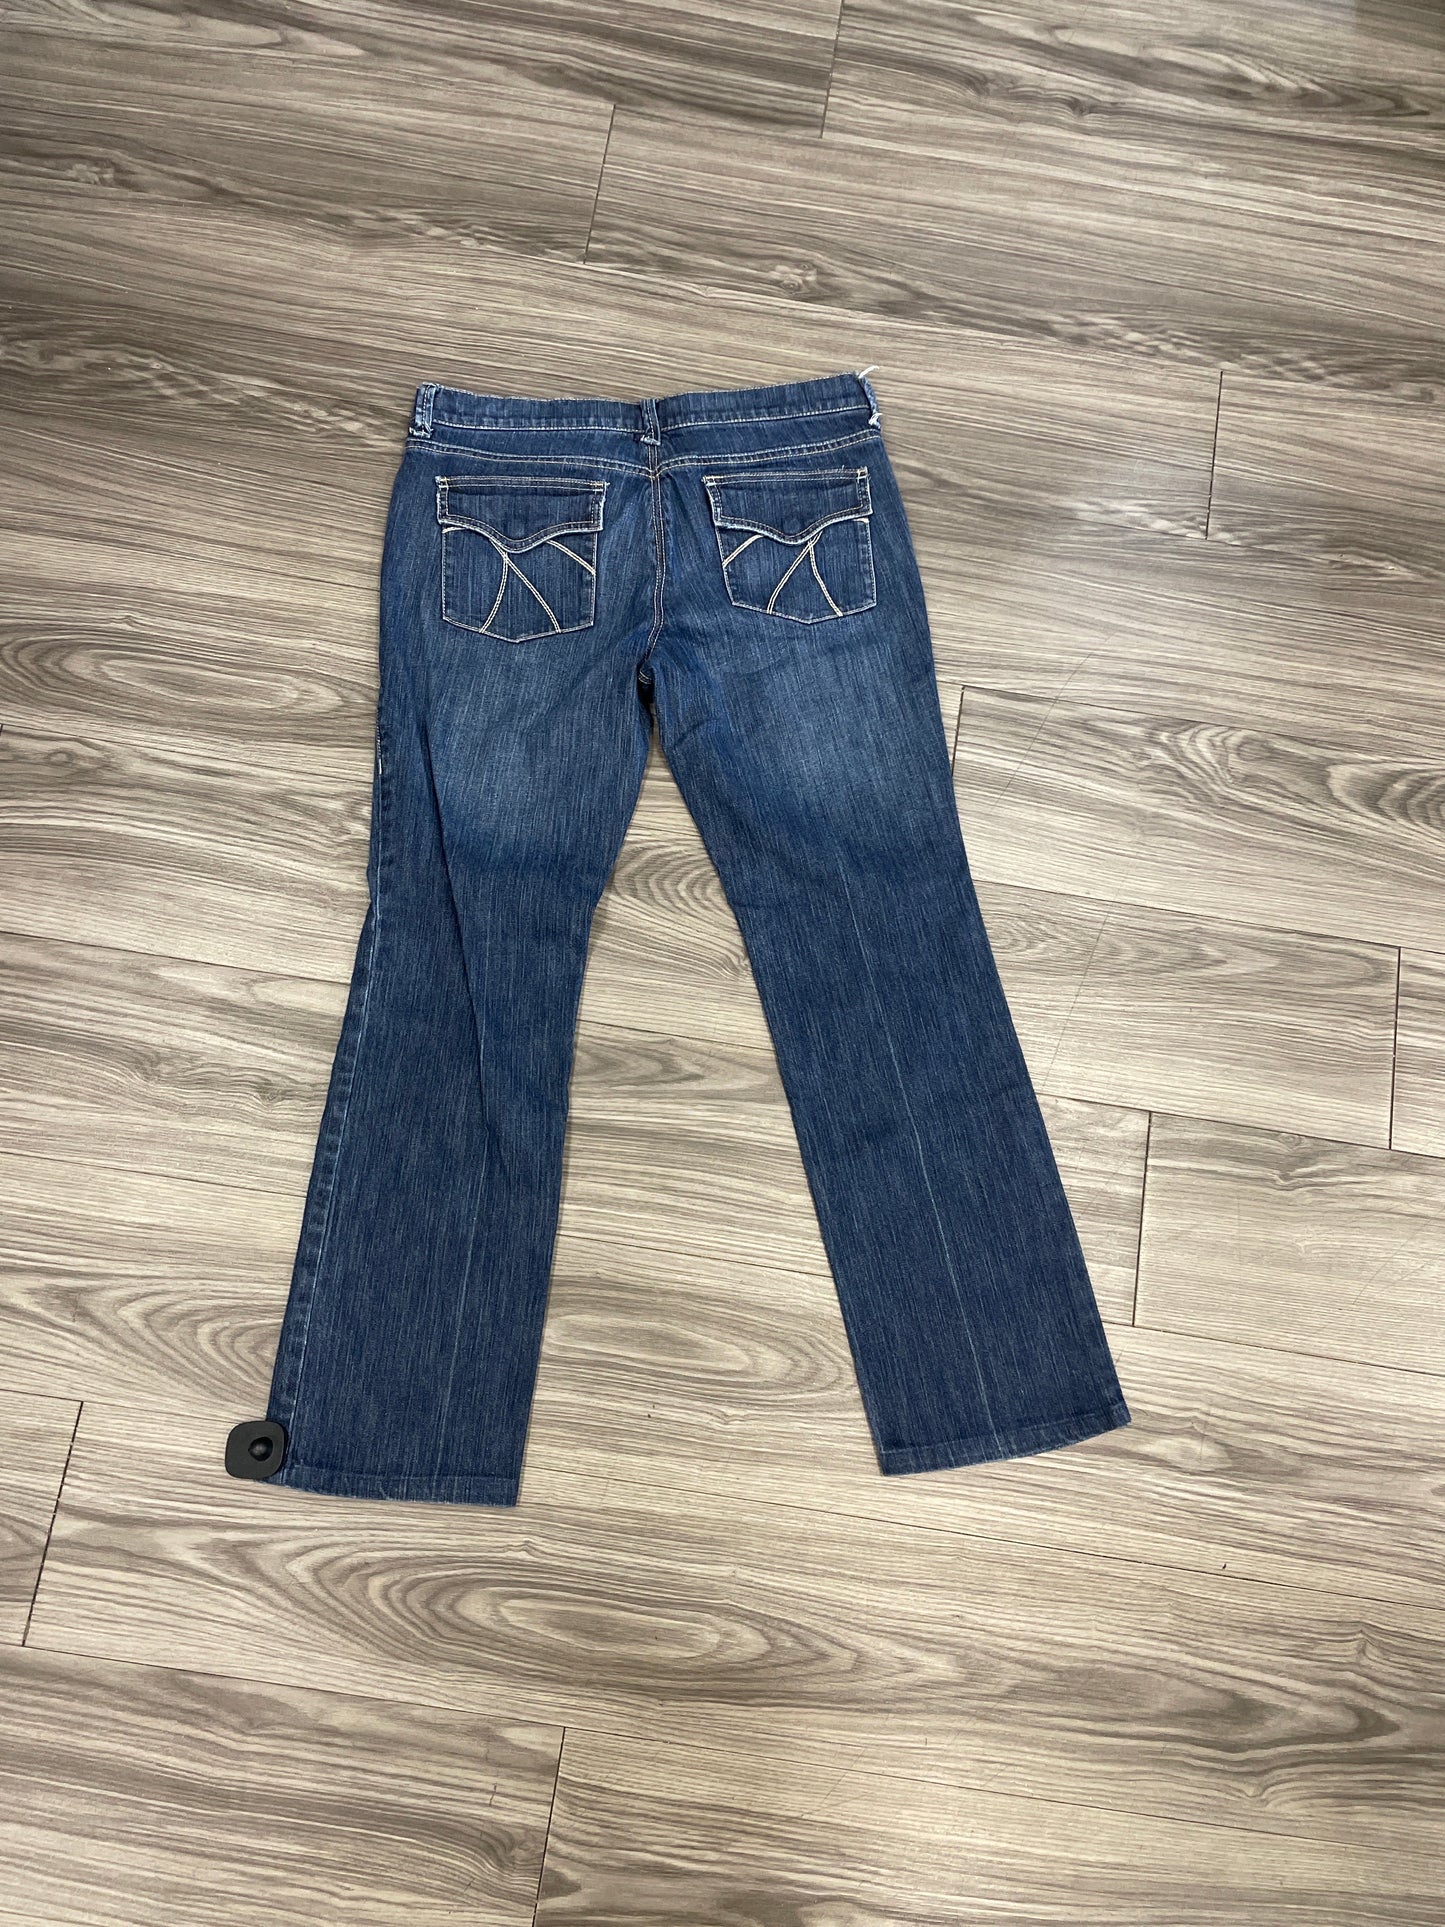 Jeans Straight By New York And Co  Size: 10